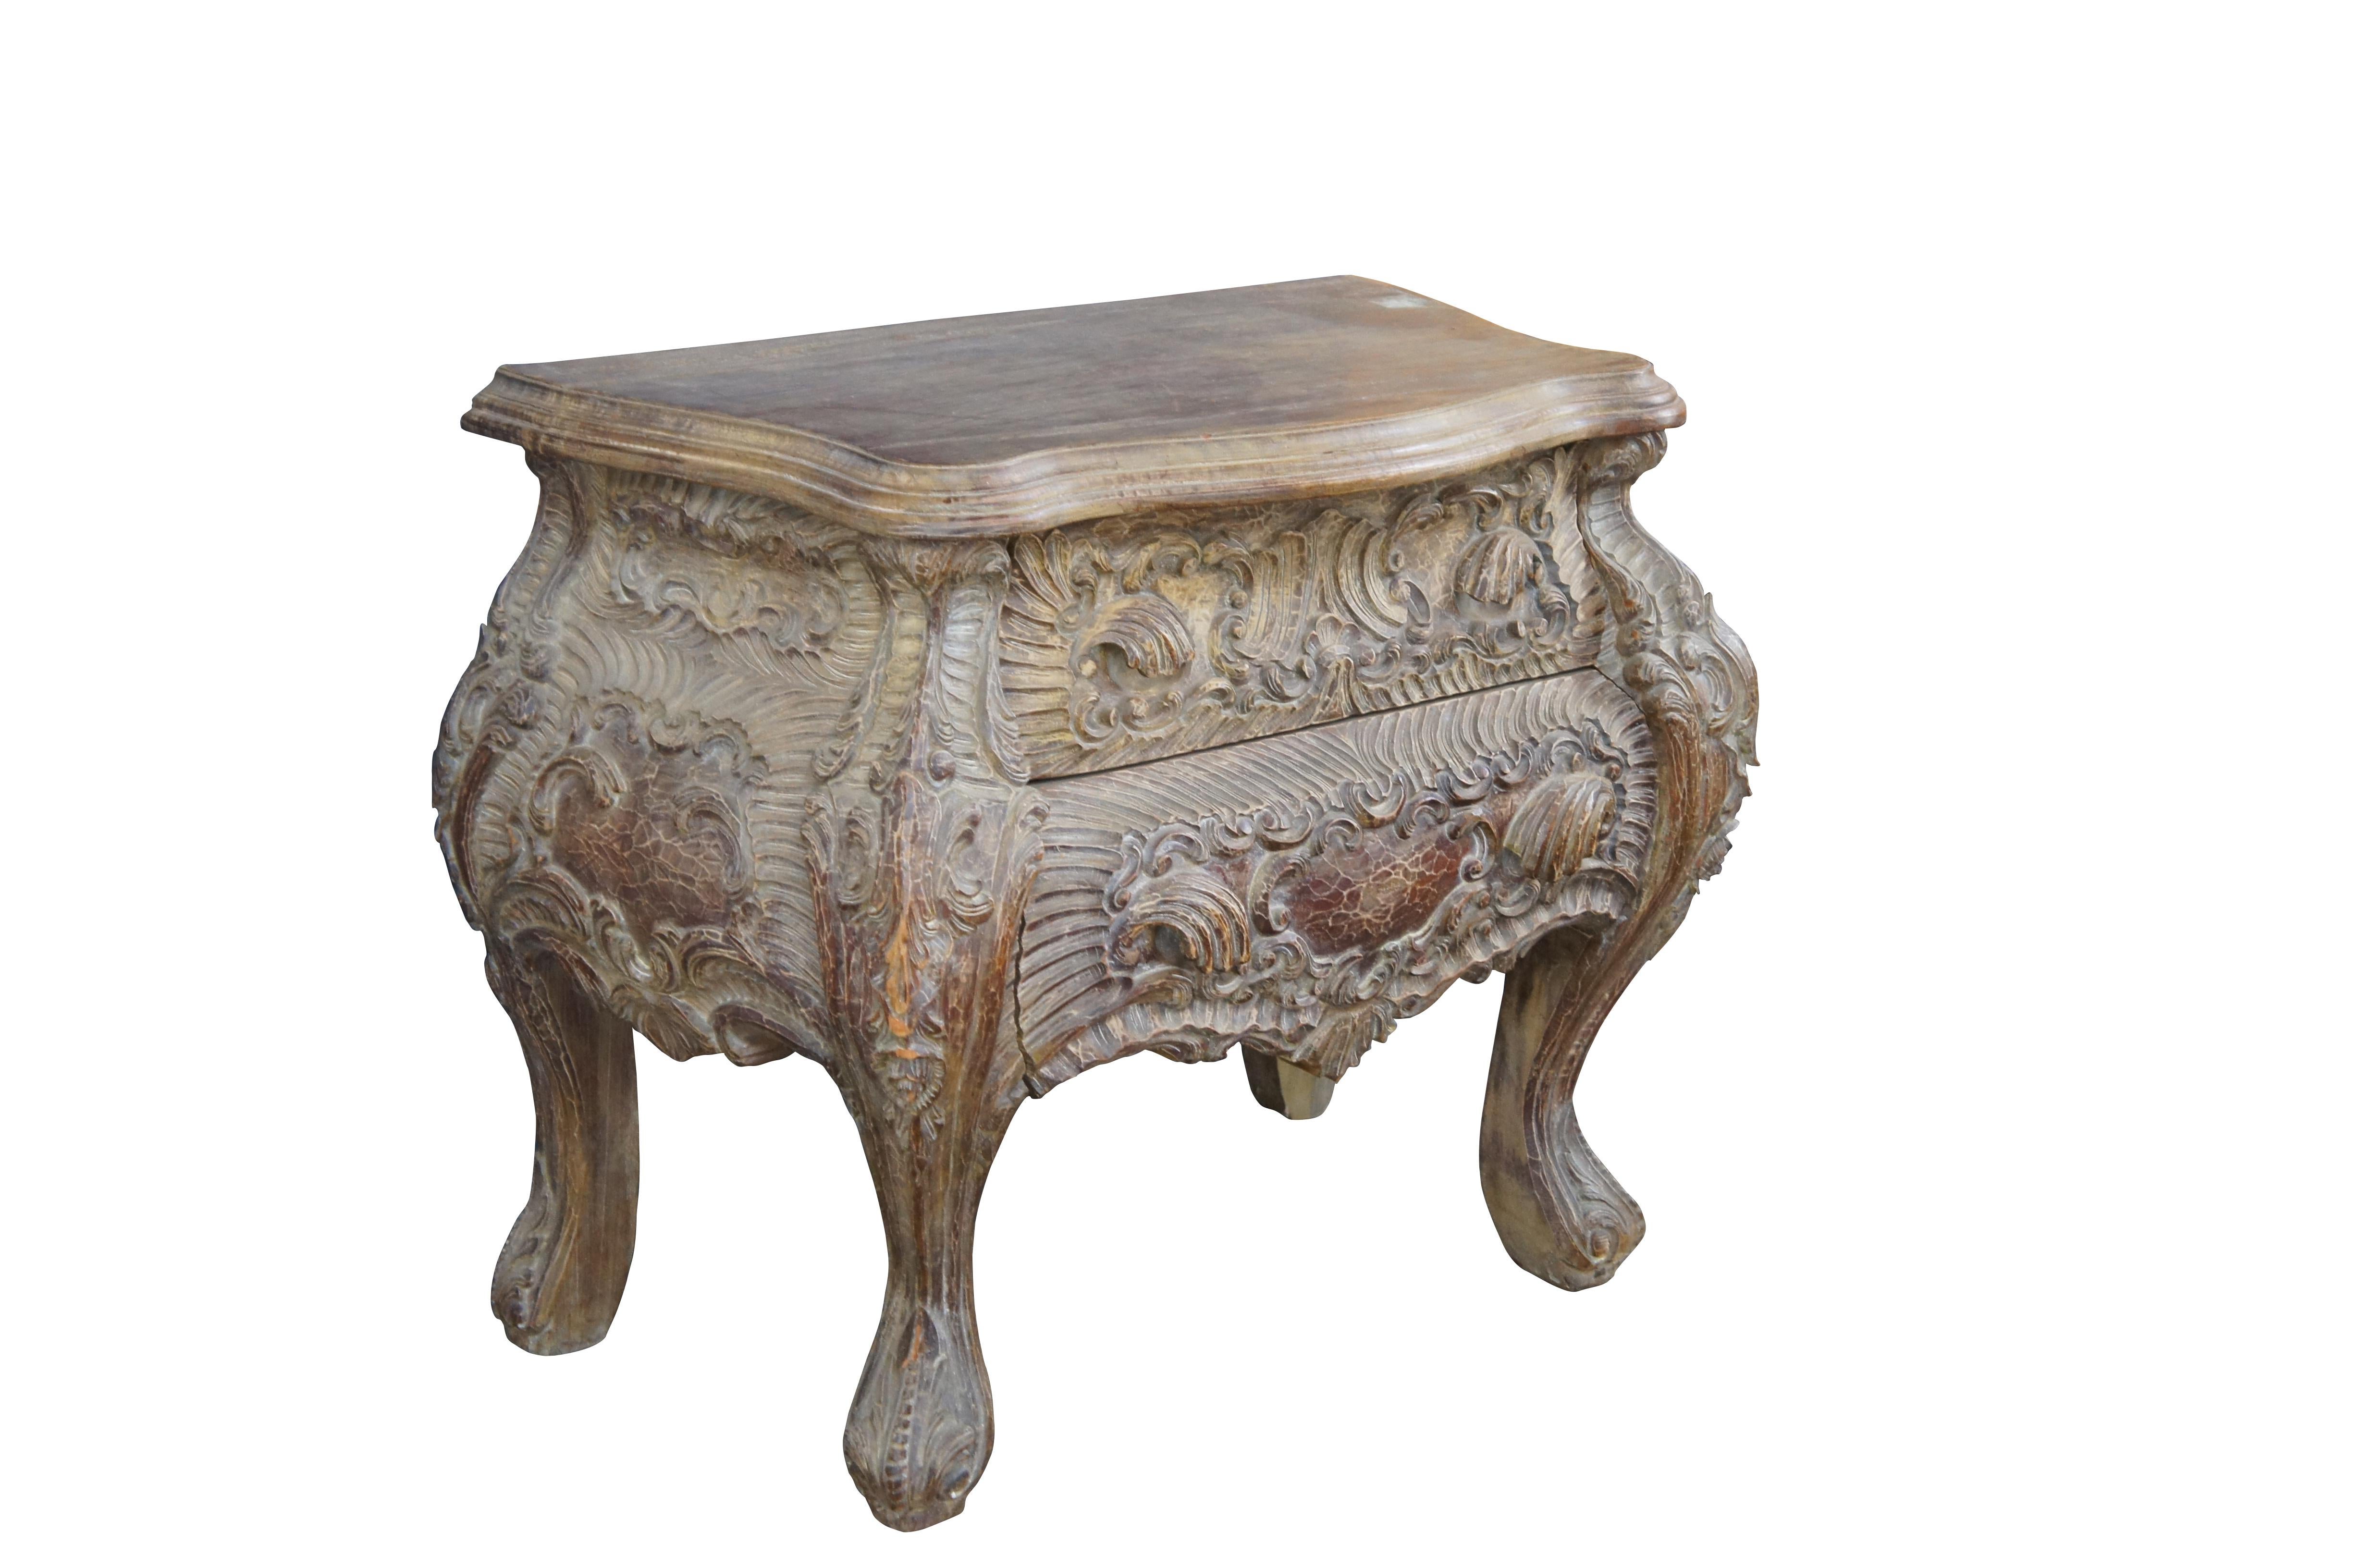 Baroque Revival carved wooden nightstand / commode. Features a serpentine frame with two drawers, heavily carved in baroque manner with cabriole legs. Great for use as a bedside table, Bombay / commode, nightstand, end or side